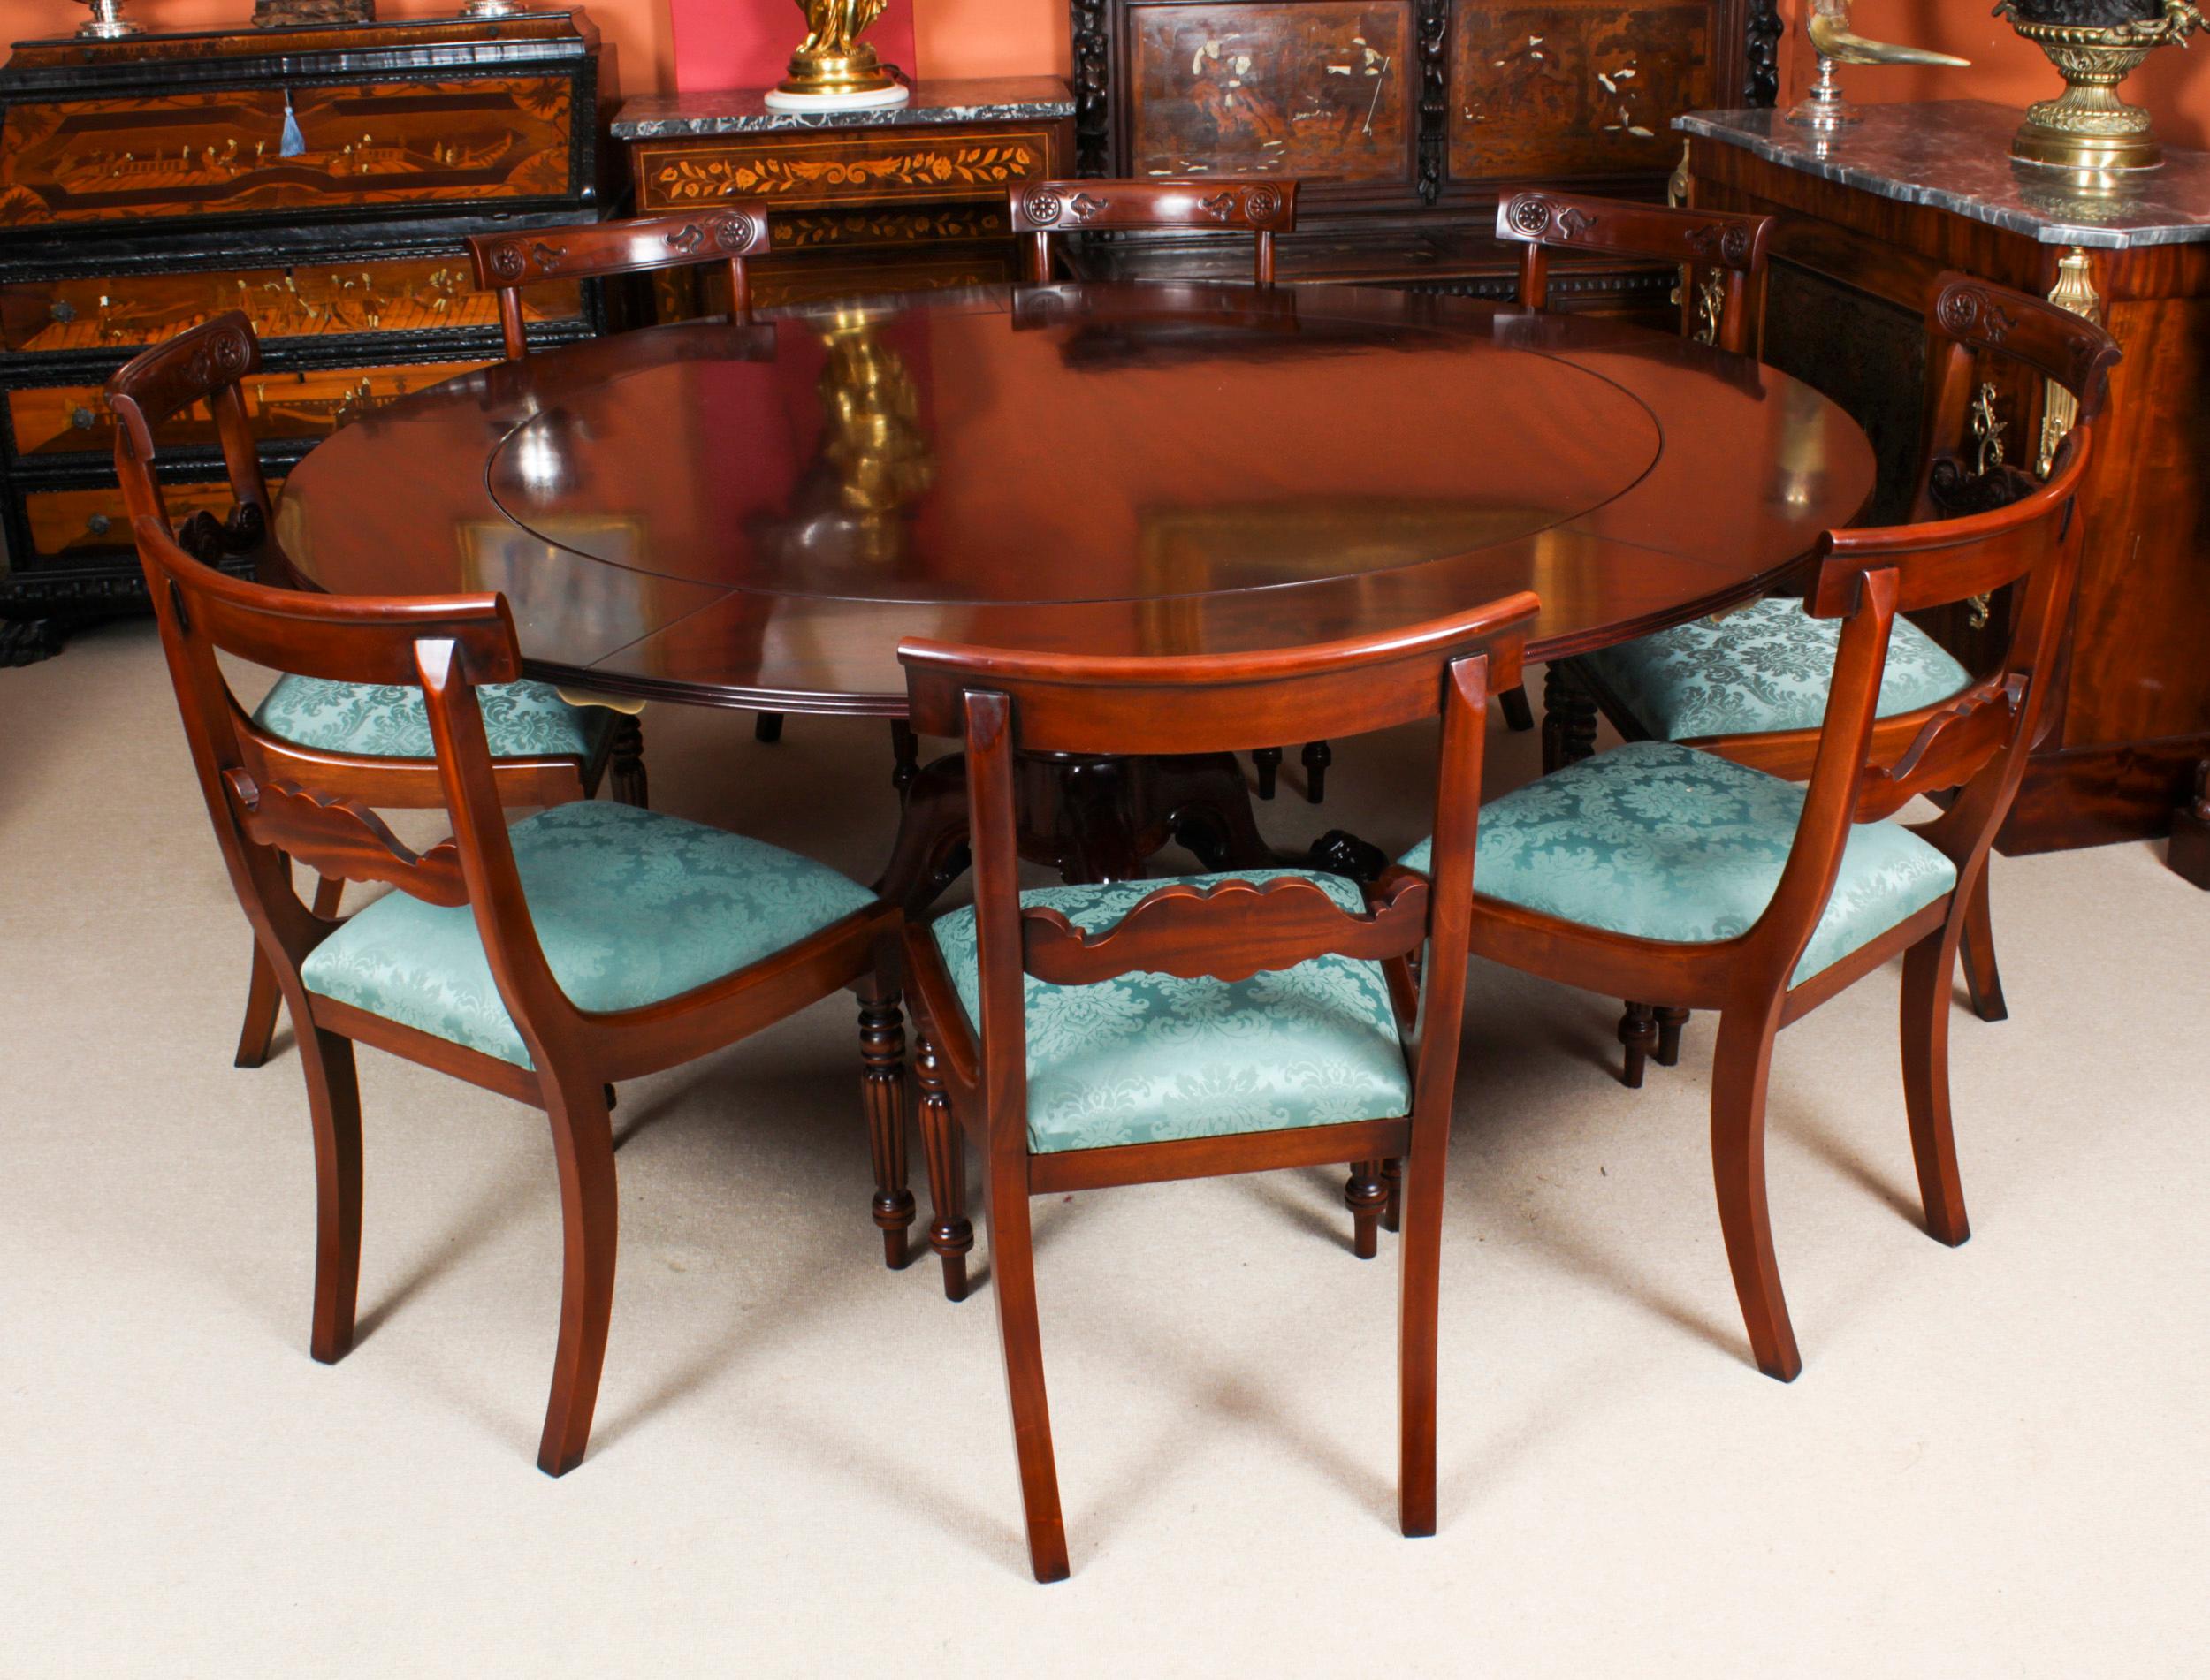 William IV Antique Flame Mahogany Gillows Dining Table 19th Century